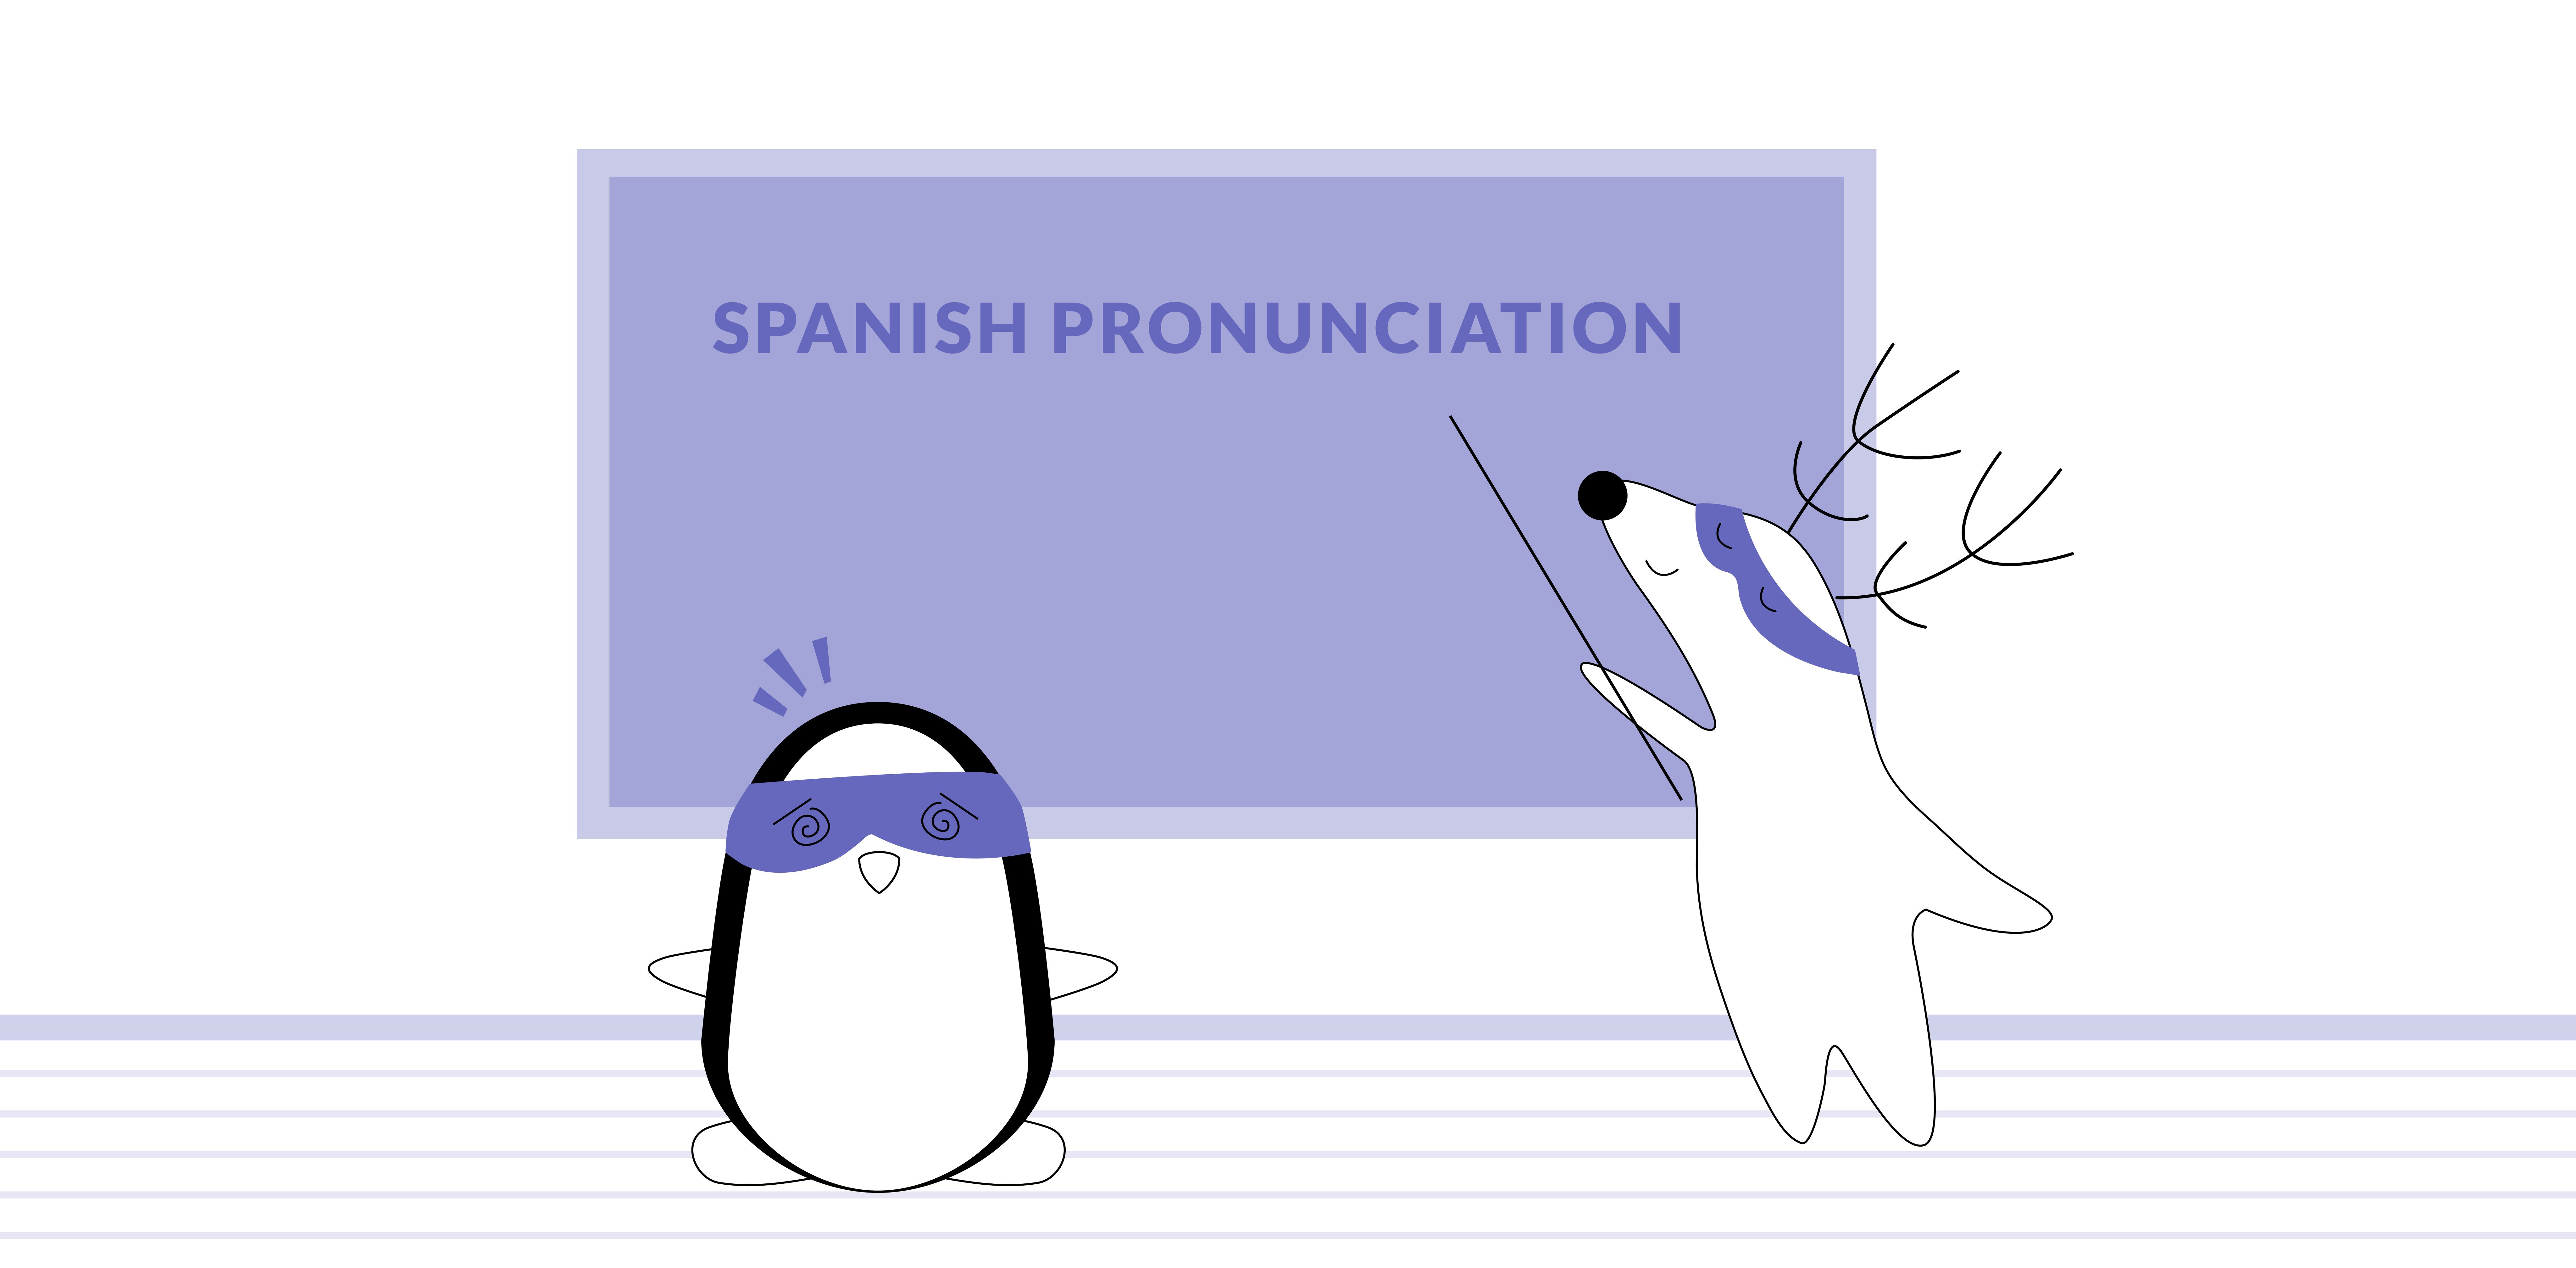 Soren and Pocky are in the classroom, looking at the introduction to Spanish pronunciation on the blackboard.